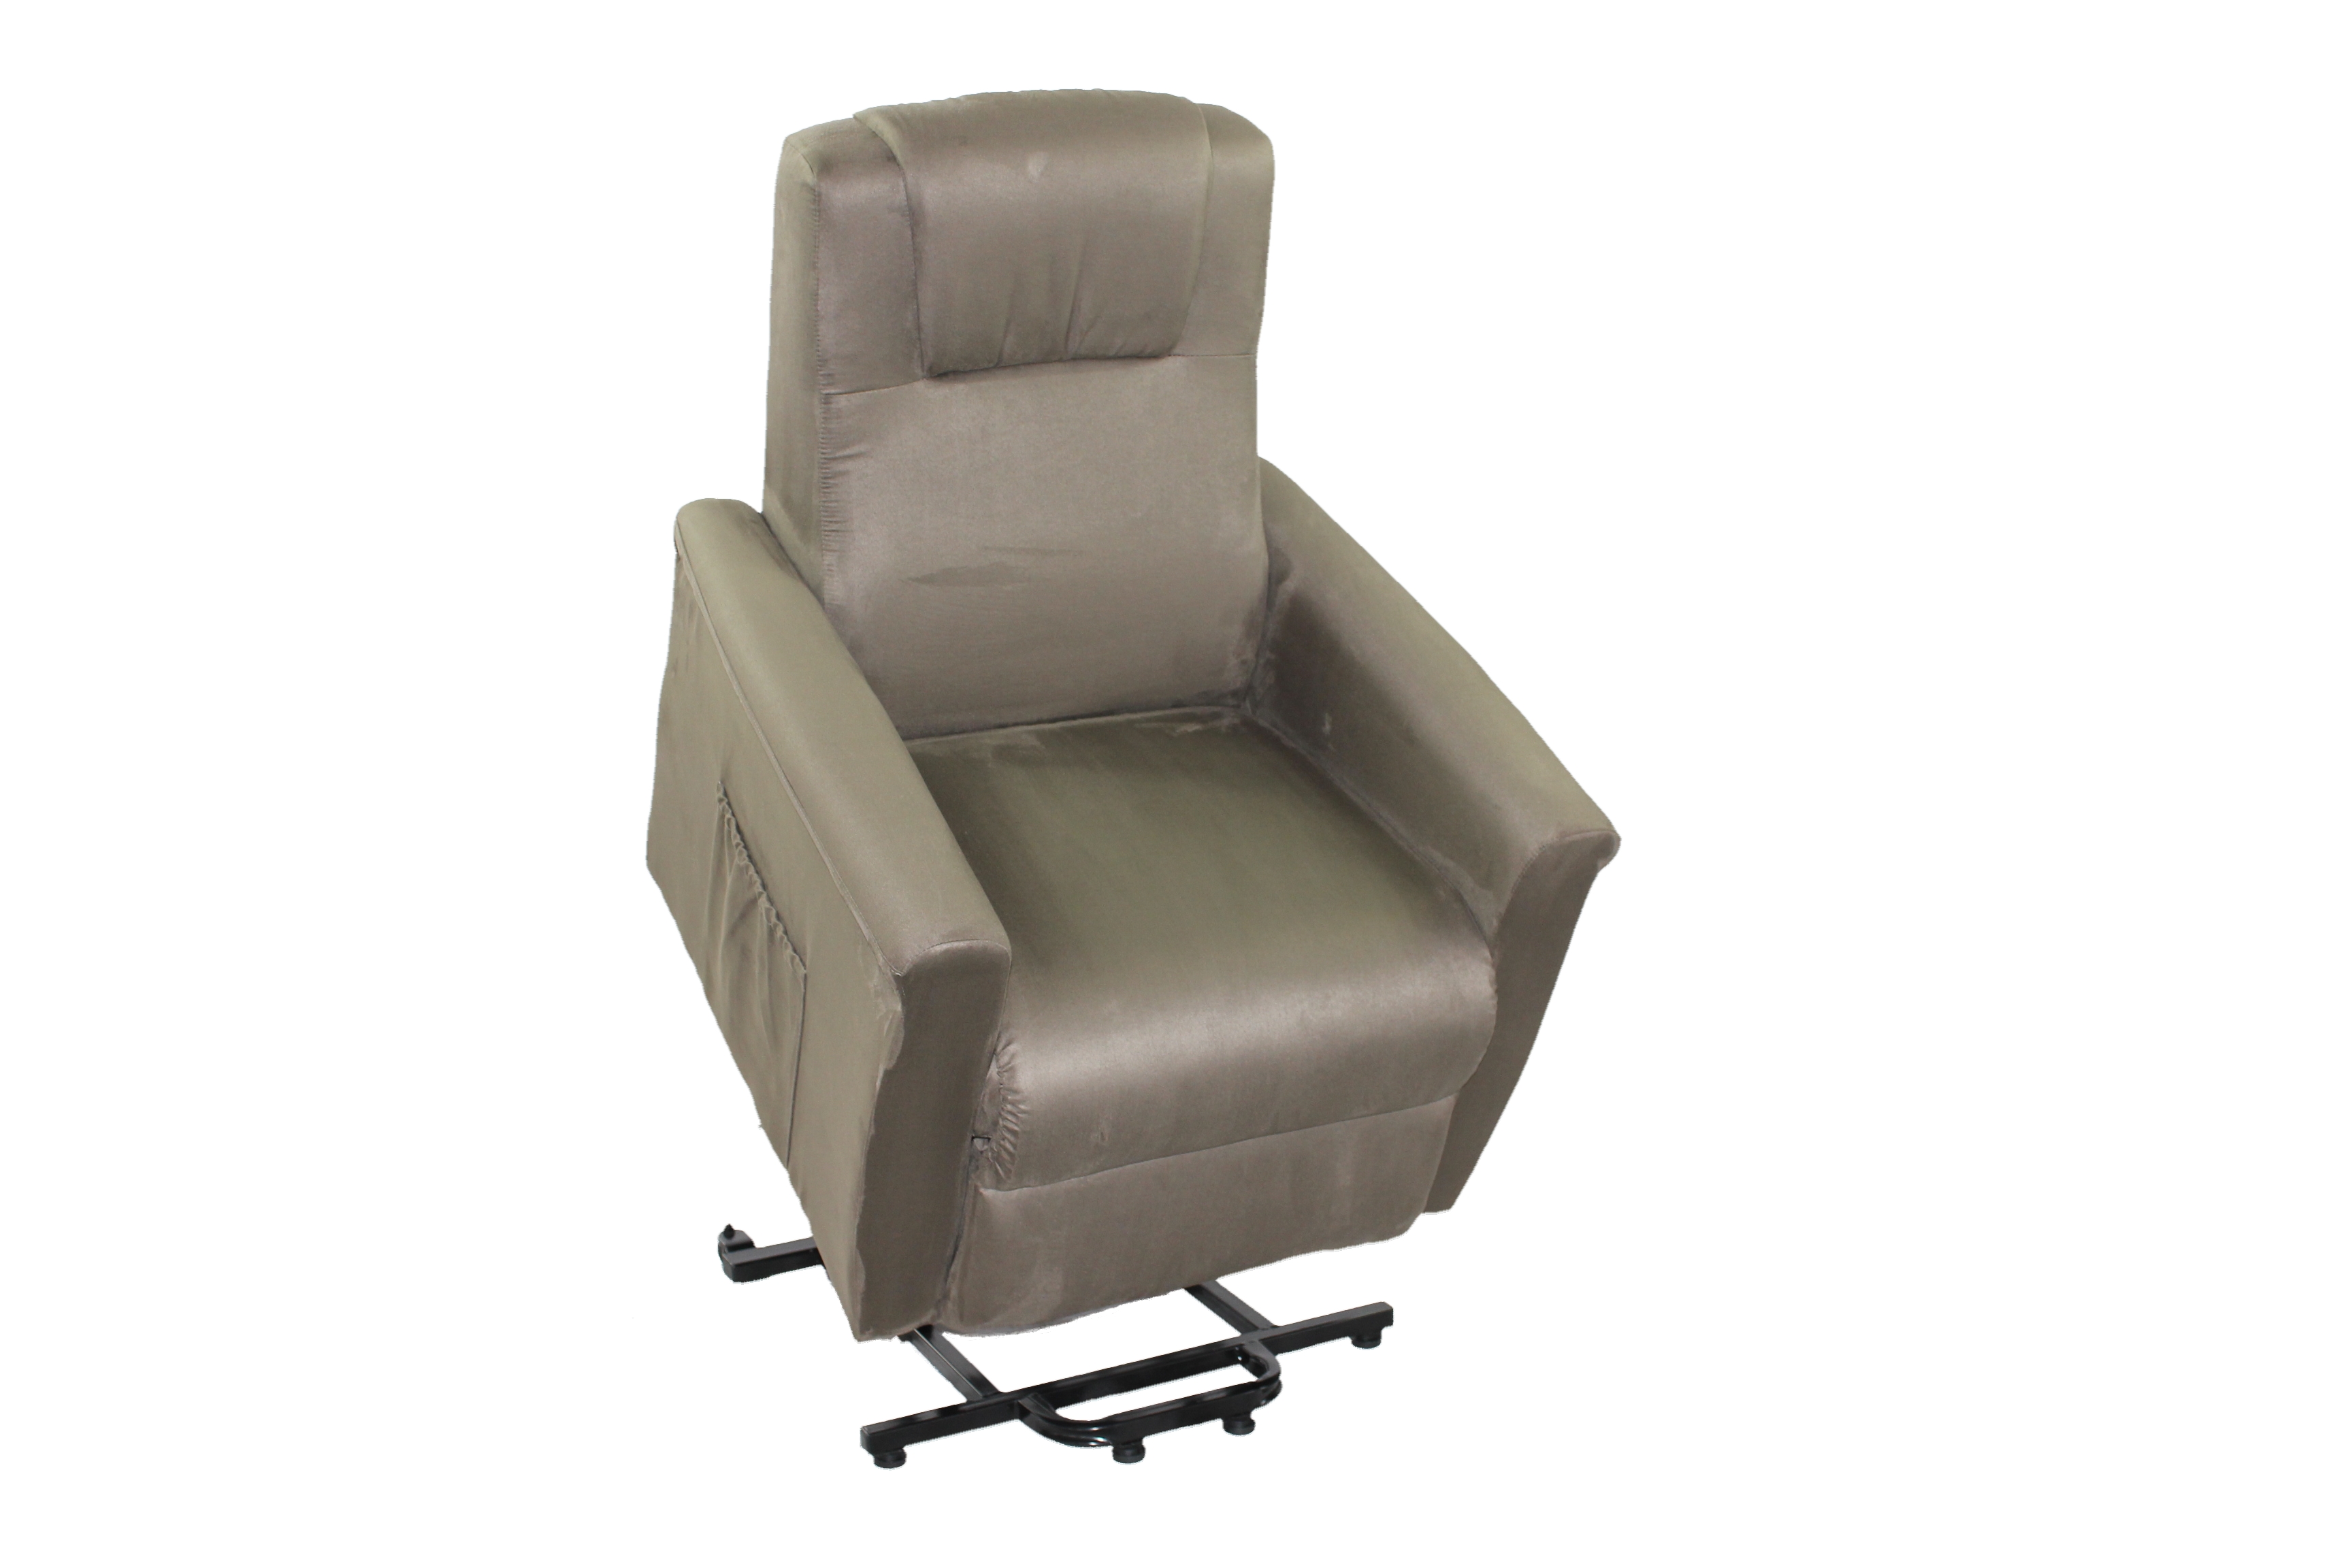 BME 005 Helping Rising up Electric Lift Recliner Massage Chairs Lift Chair